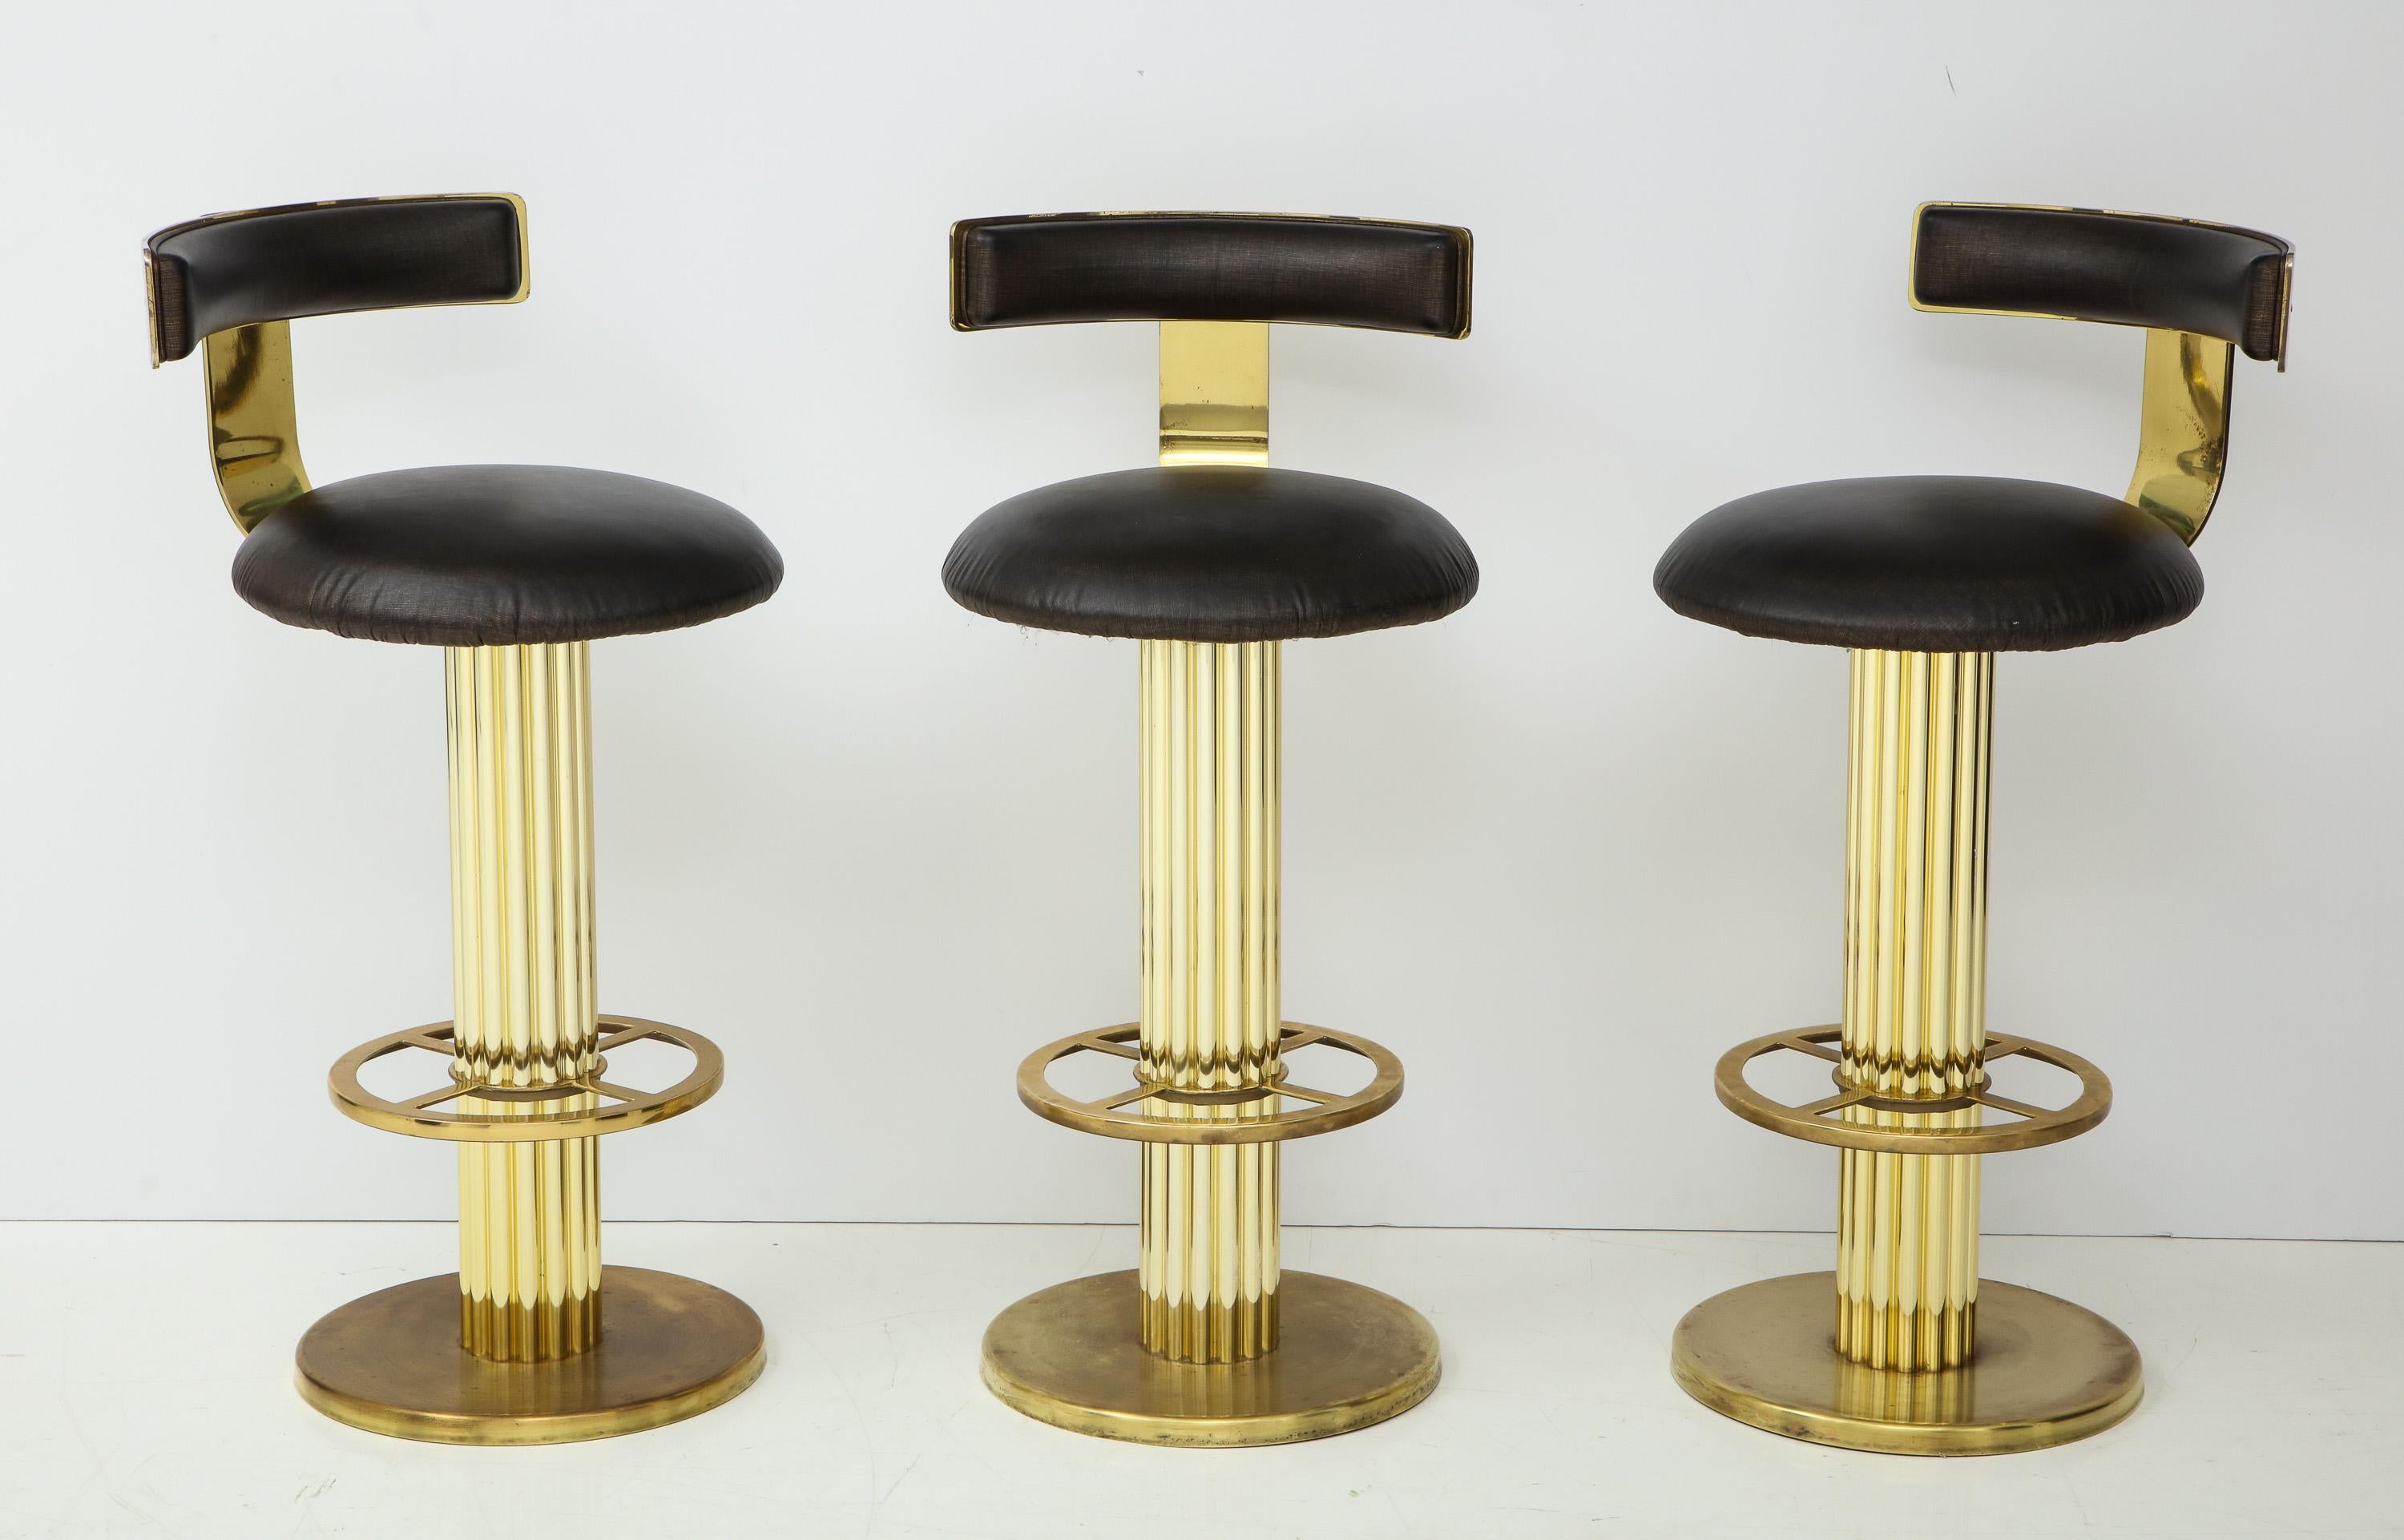 Set of three swivel barstools in uncommon brass finish, produced by Designs for Leisure, circa 1980s. Well-made and heavy, with fluted column supports that include footrests. Price is for the set of three.